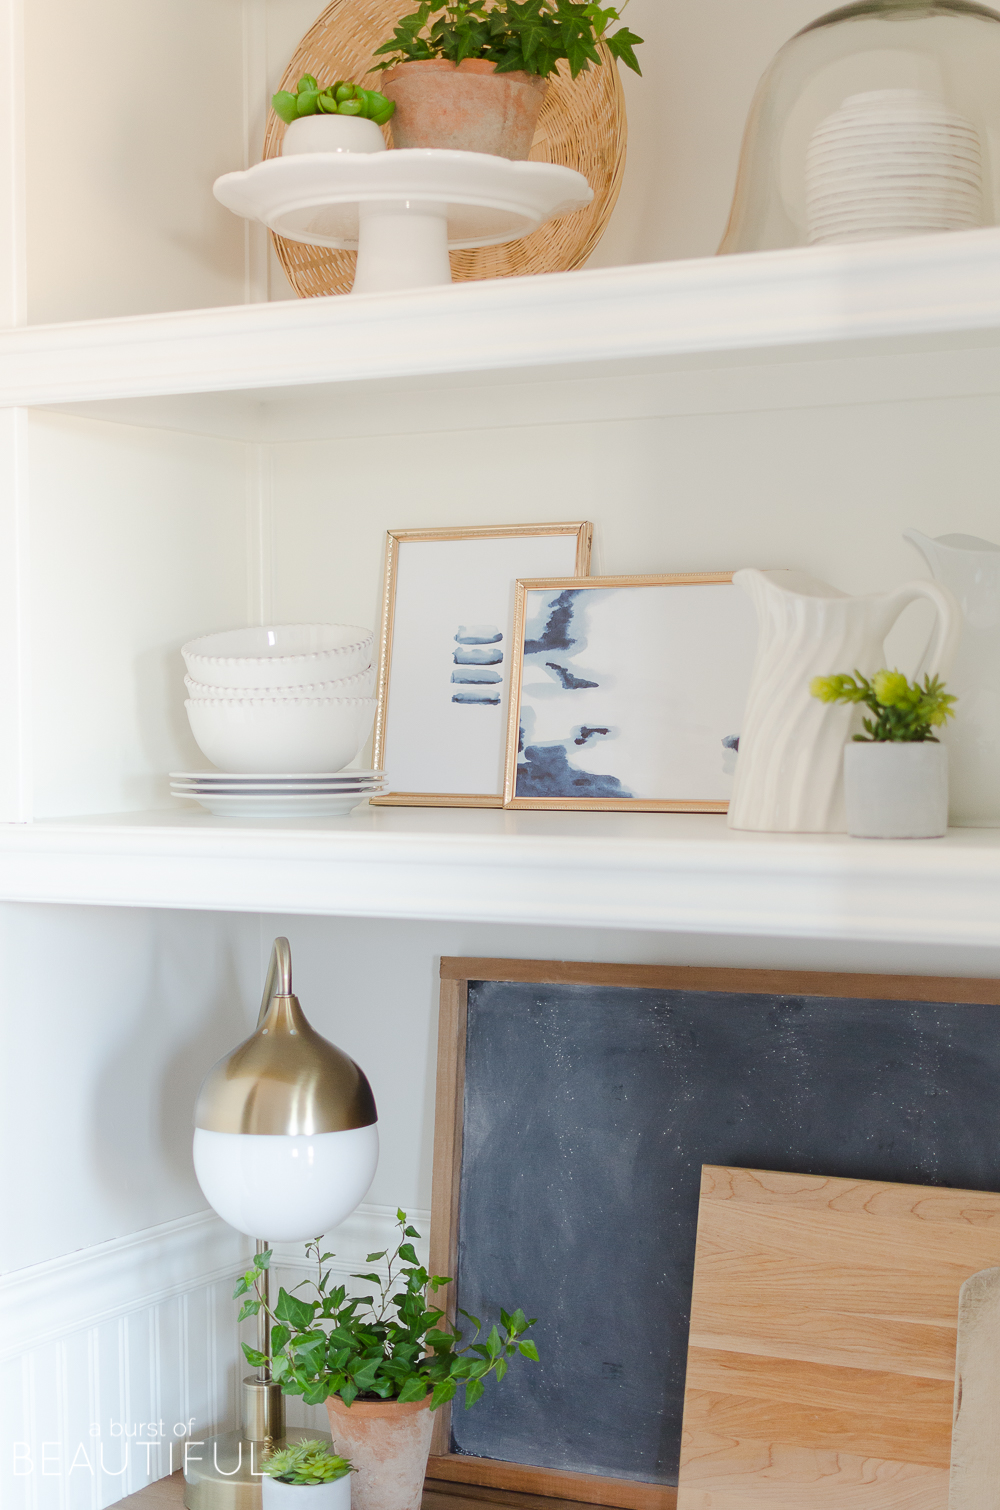 A small kitchen nook is decorated for spring with these simple and easy-to-follow steps for styling open shelving.